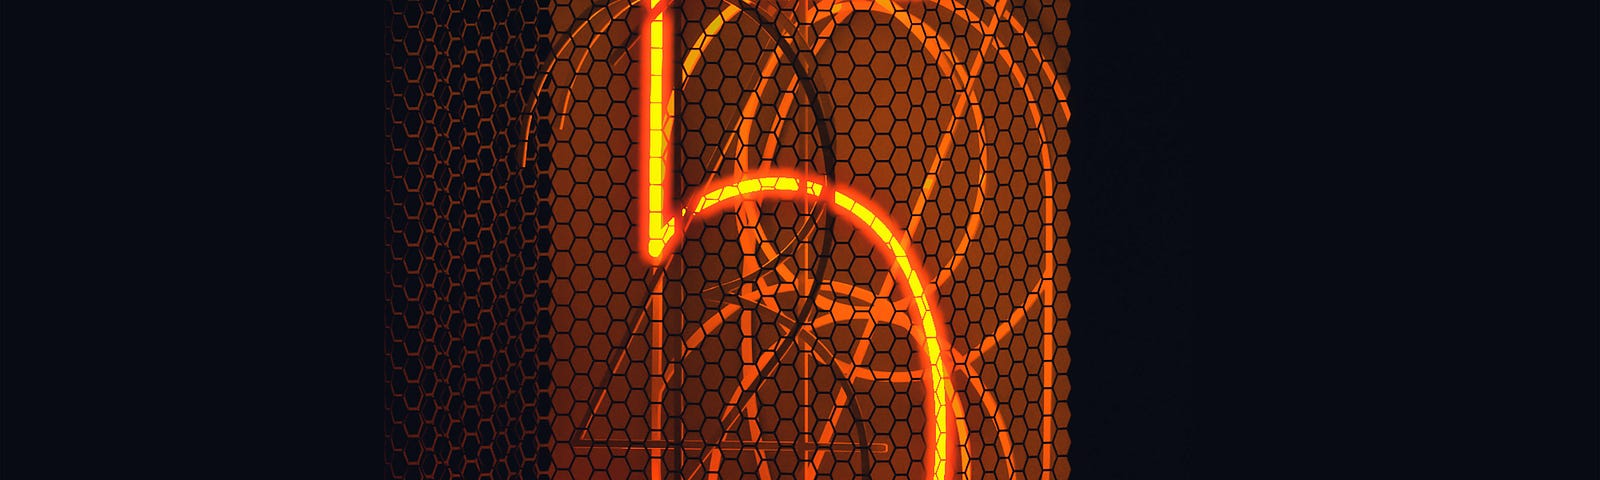 neon orange numbers, overlapping, on black background, with the number 5 the brightest